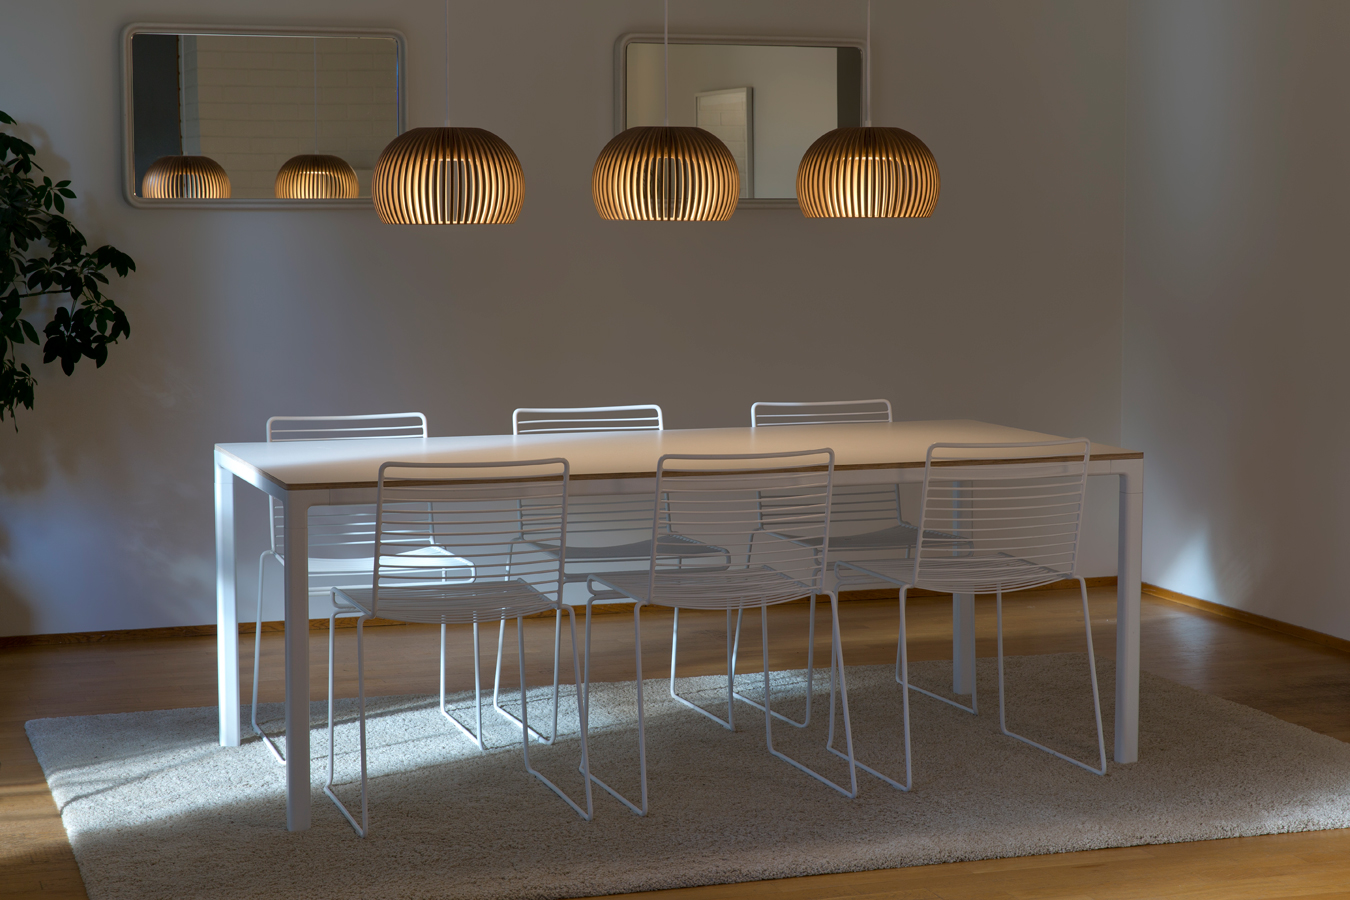 A white dining table with six chairs and three Atto pendant lamps hanging above.